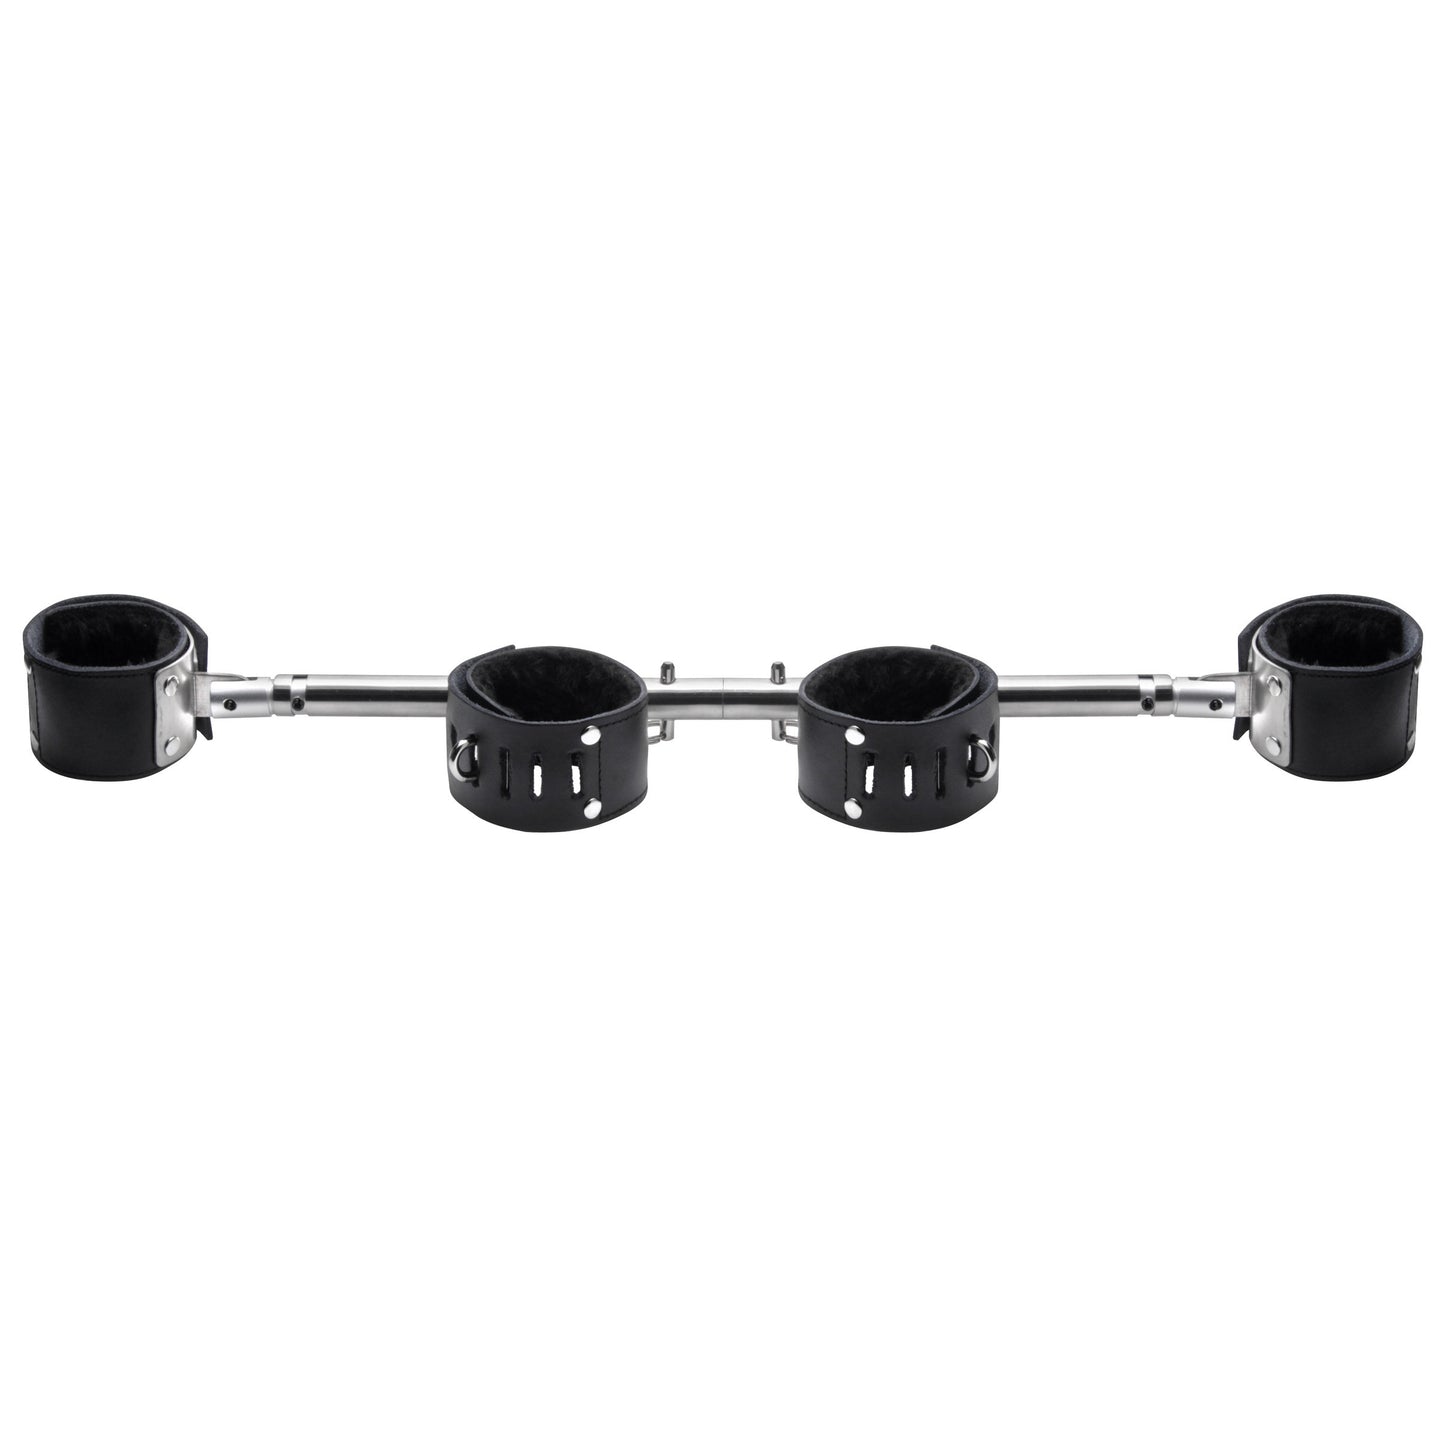 Adjustable Swiveling Spreader Bar With Leather Cuffs